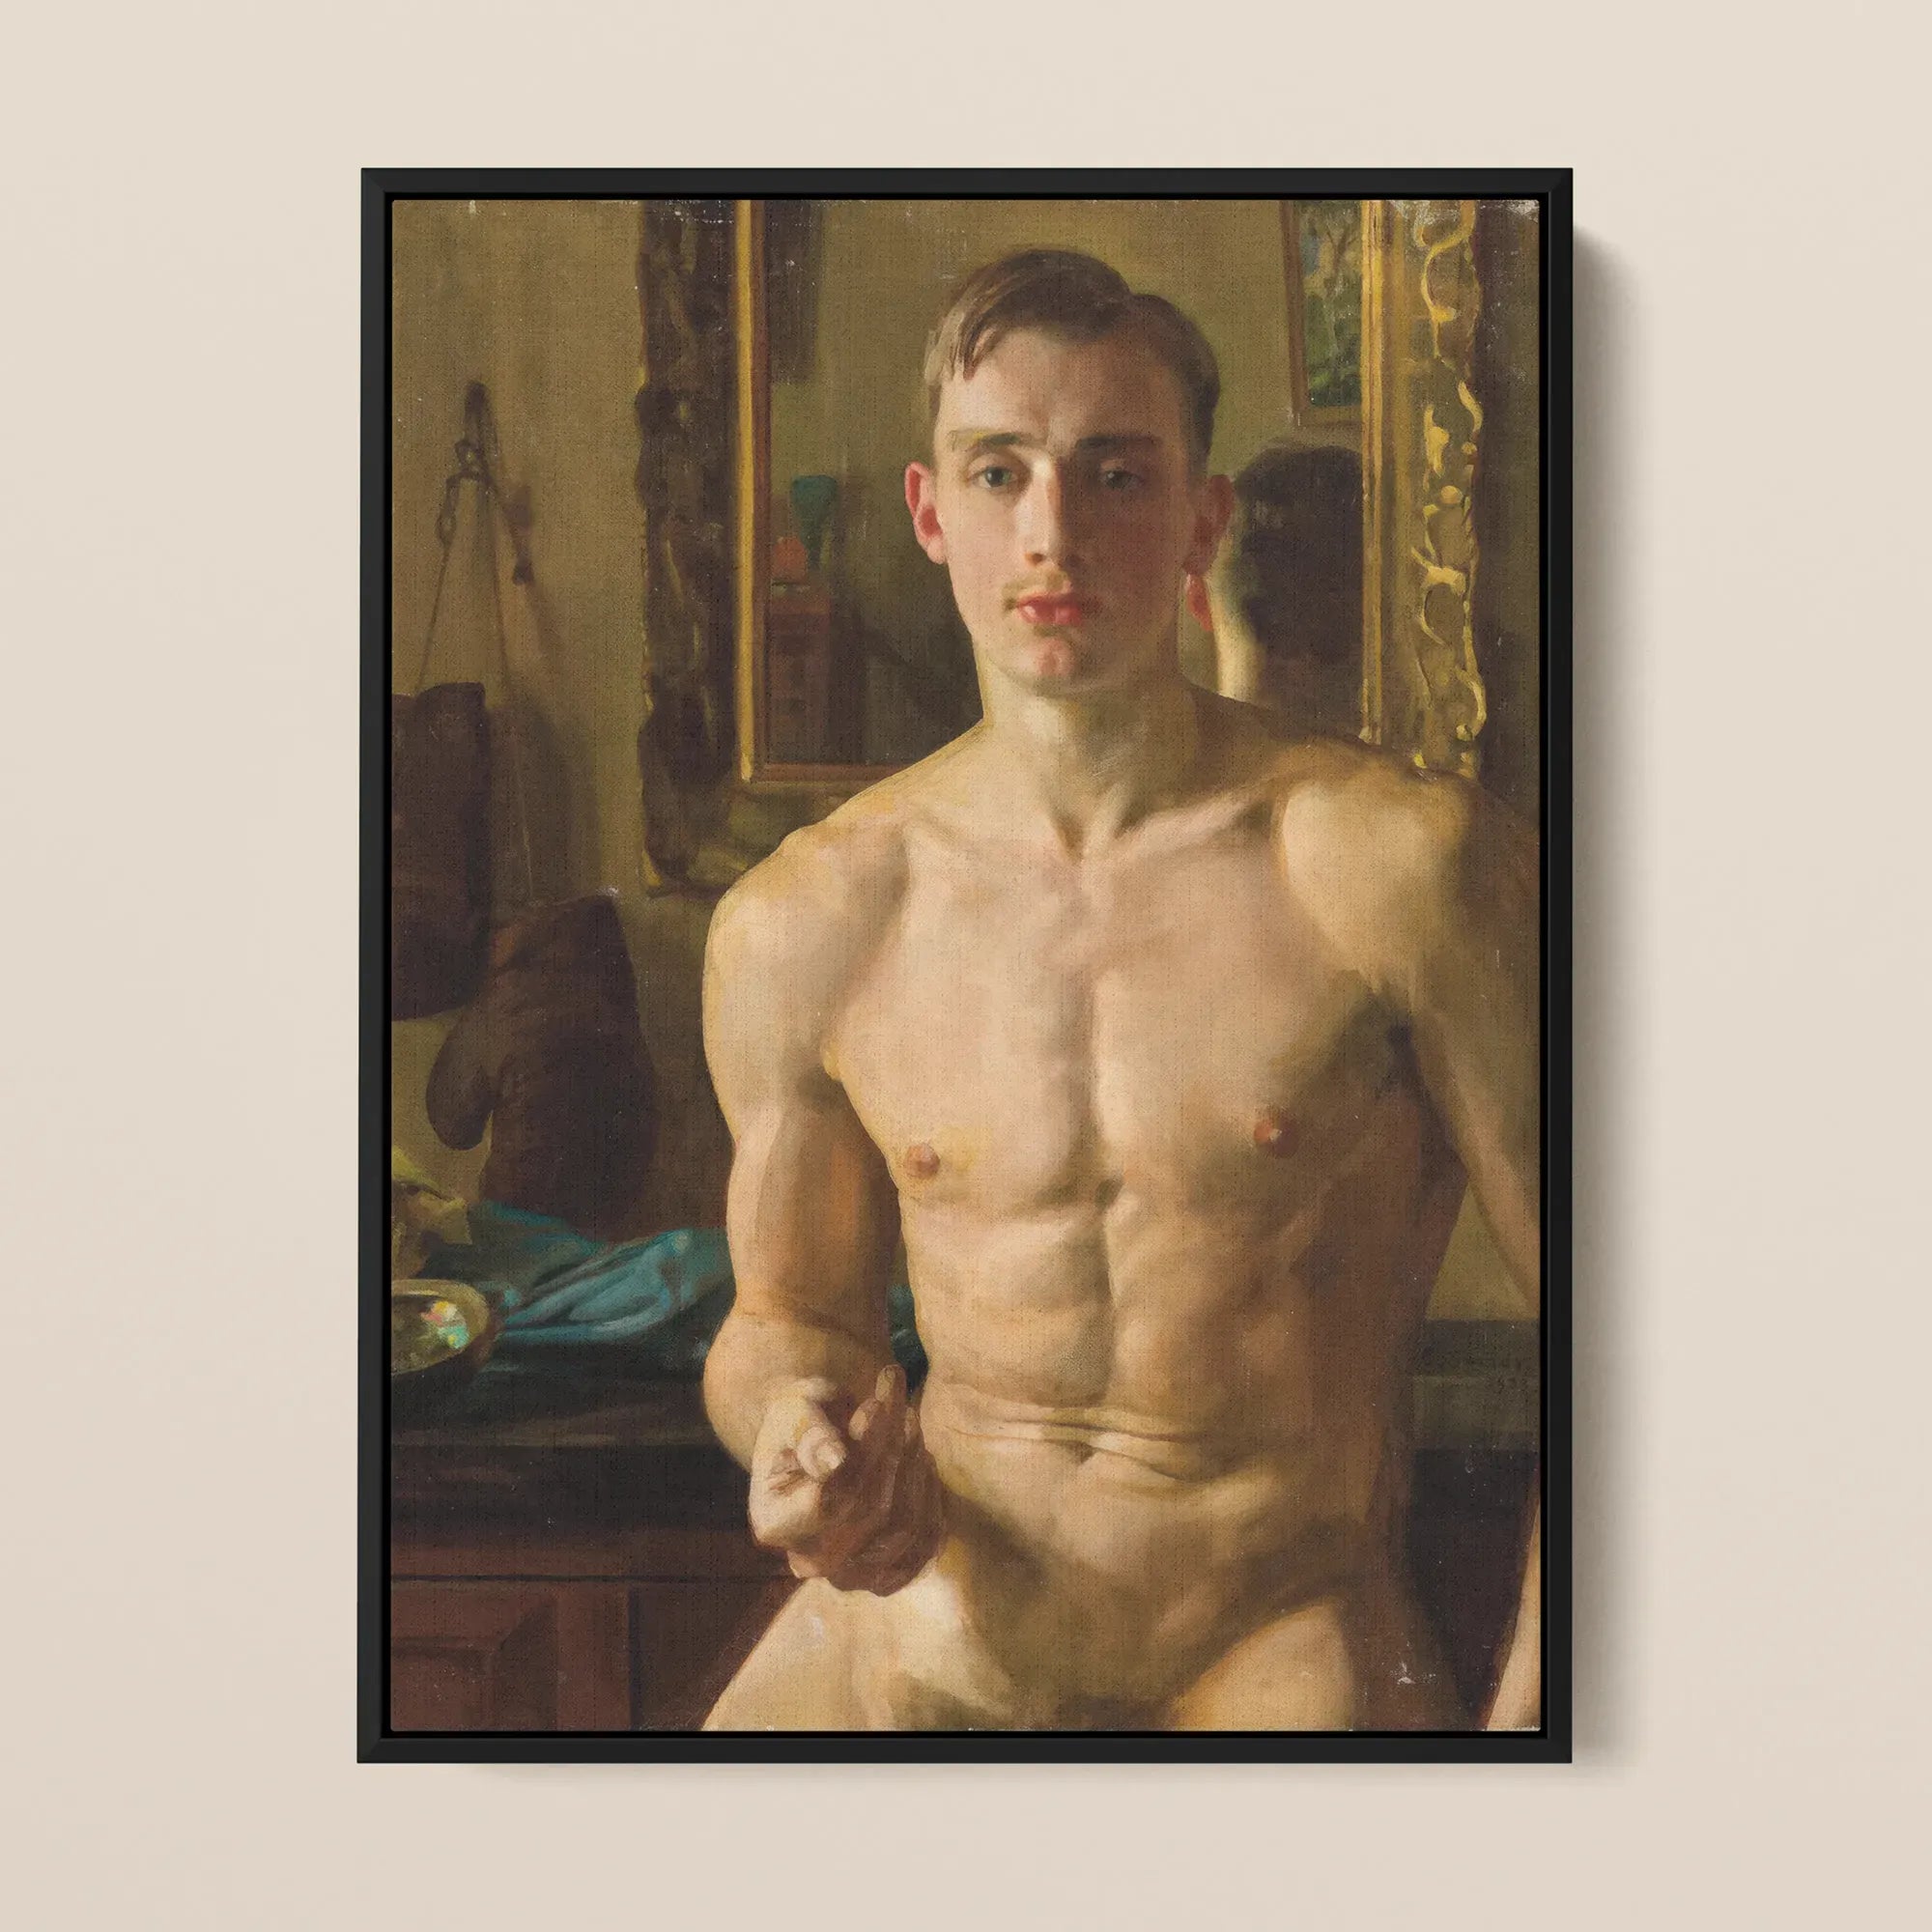 The Boxer - Konstantin Andreevic Somov Nude Framed Canvas - Posters Prints & Visual Artwork - Aesthetic Art